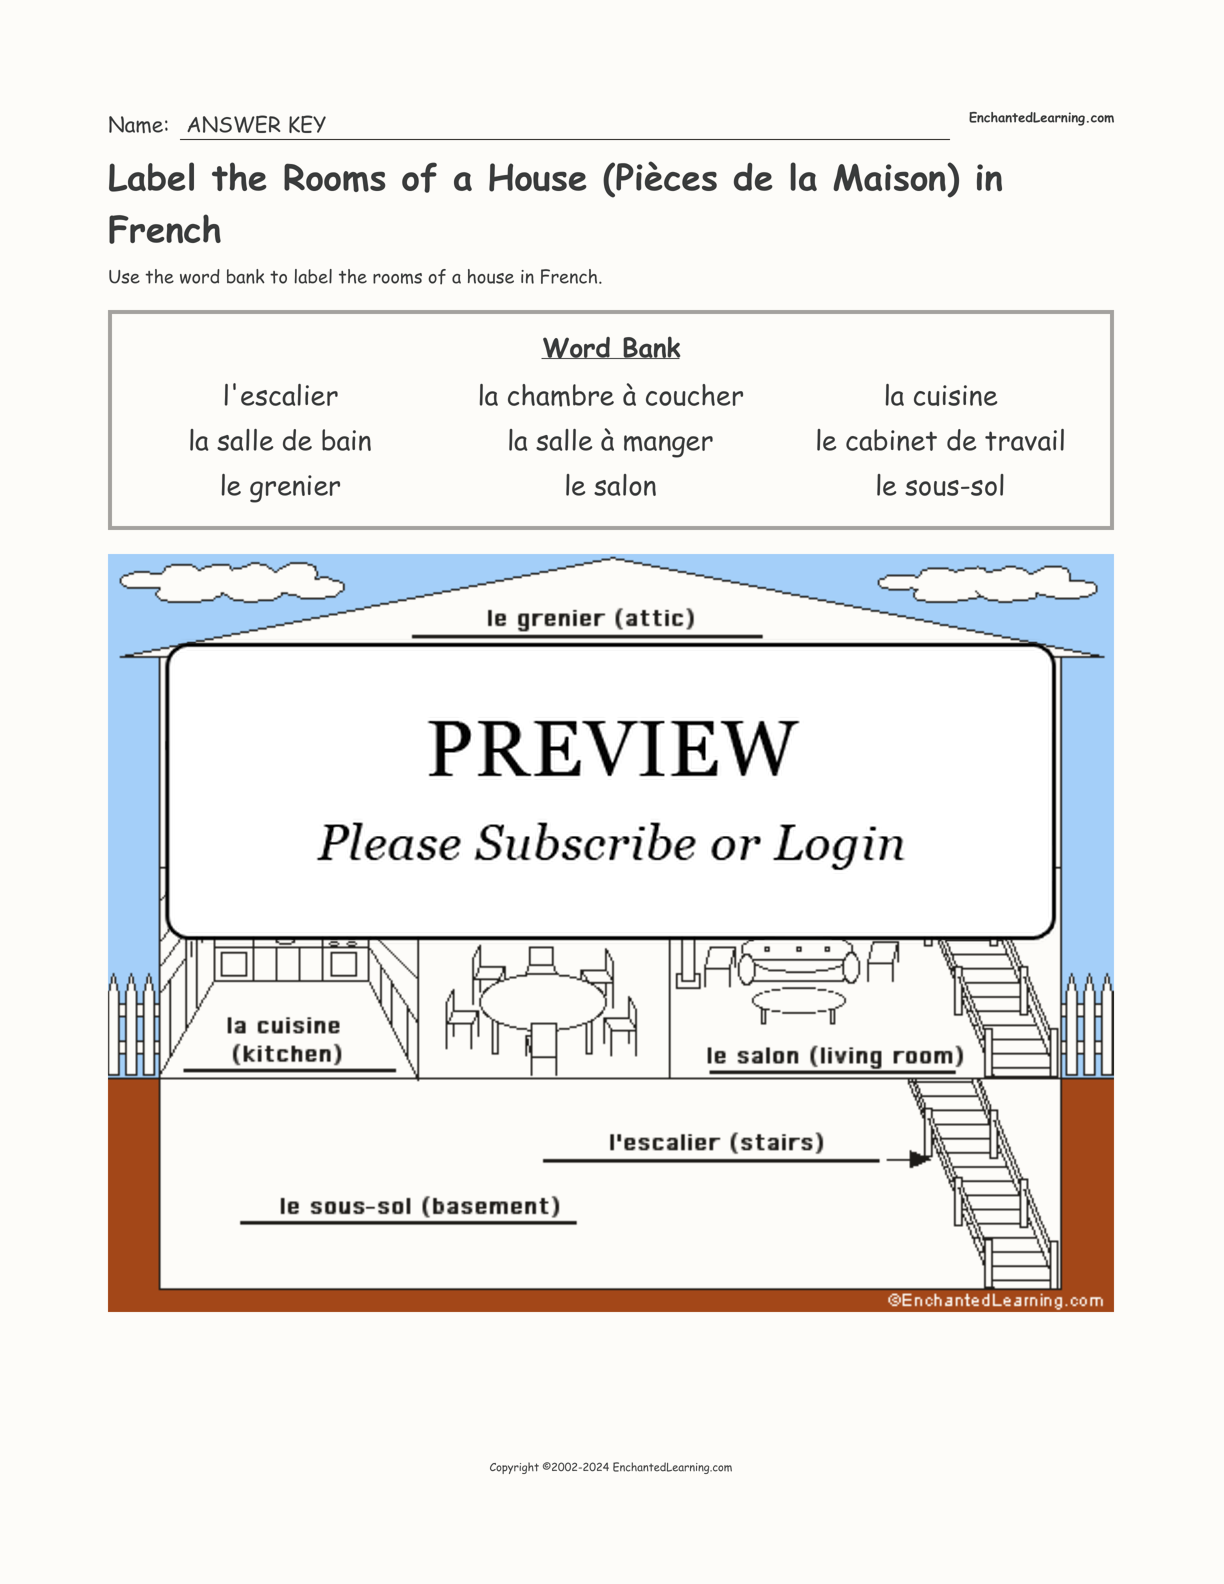 Label the Rooms of a House (Pièces de la Maison) in French interactive worksheet page 2